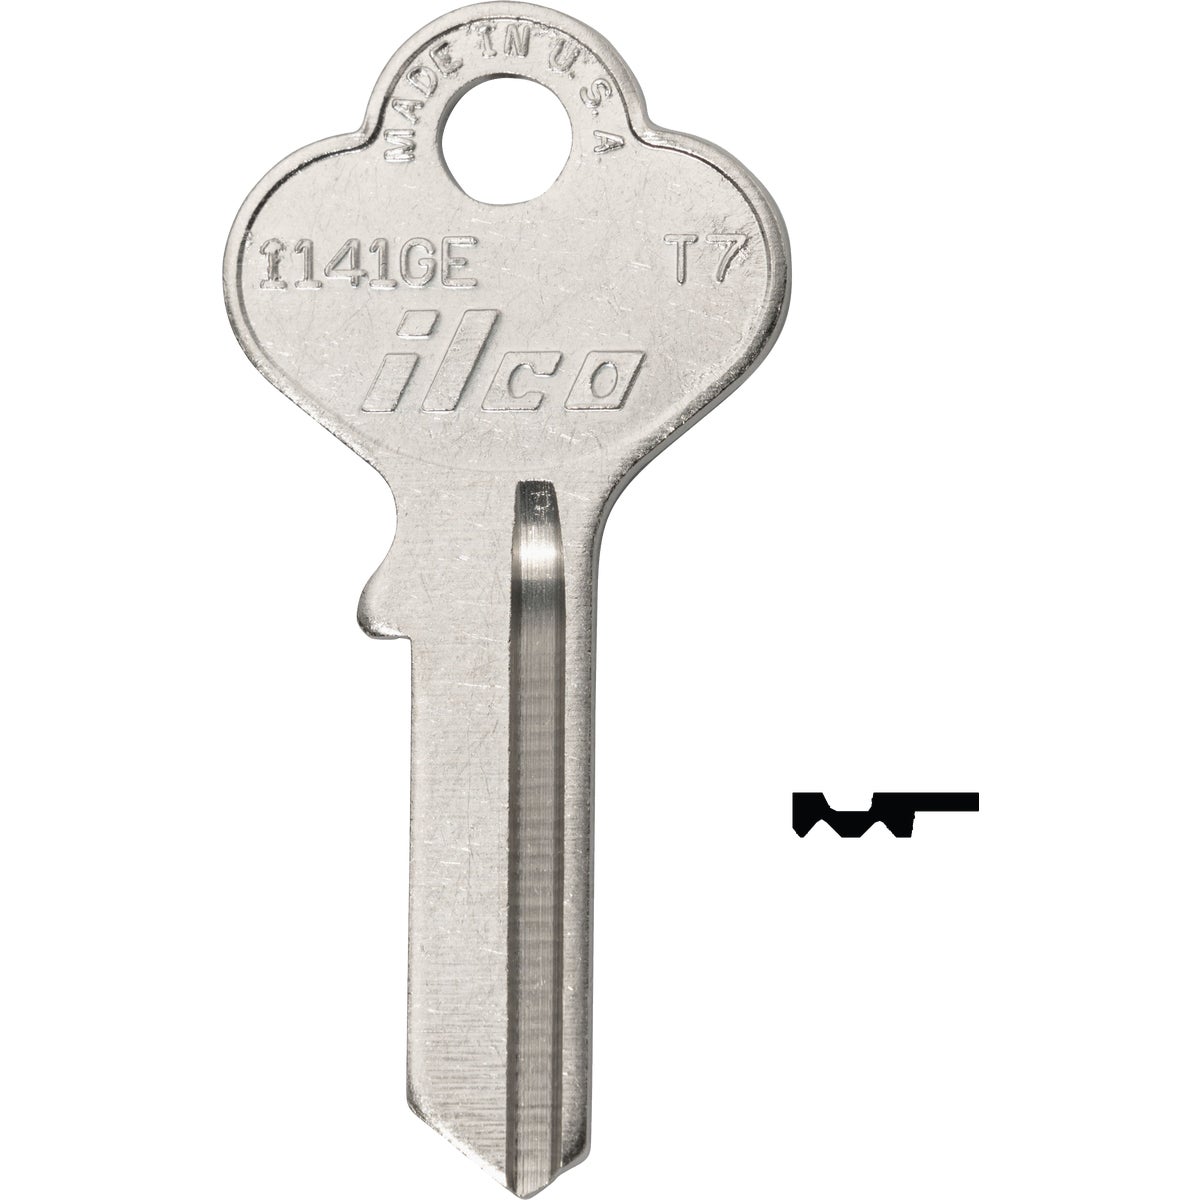 Item 237407, Nickel-plated key blank. When you order one, you will receive 10 keys.